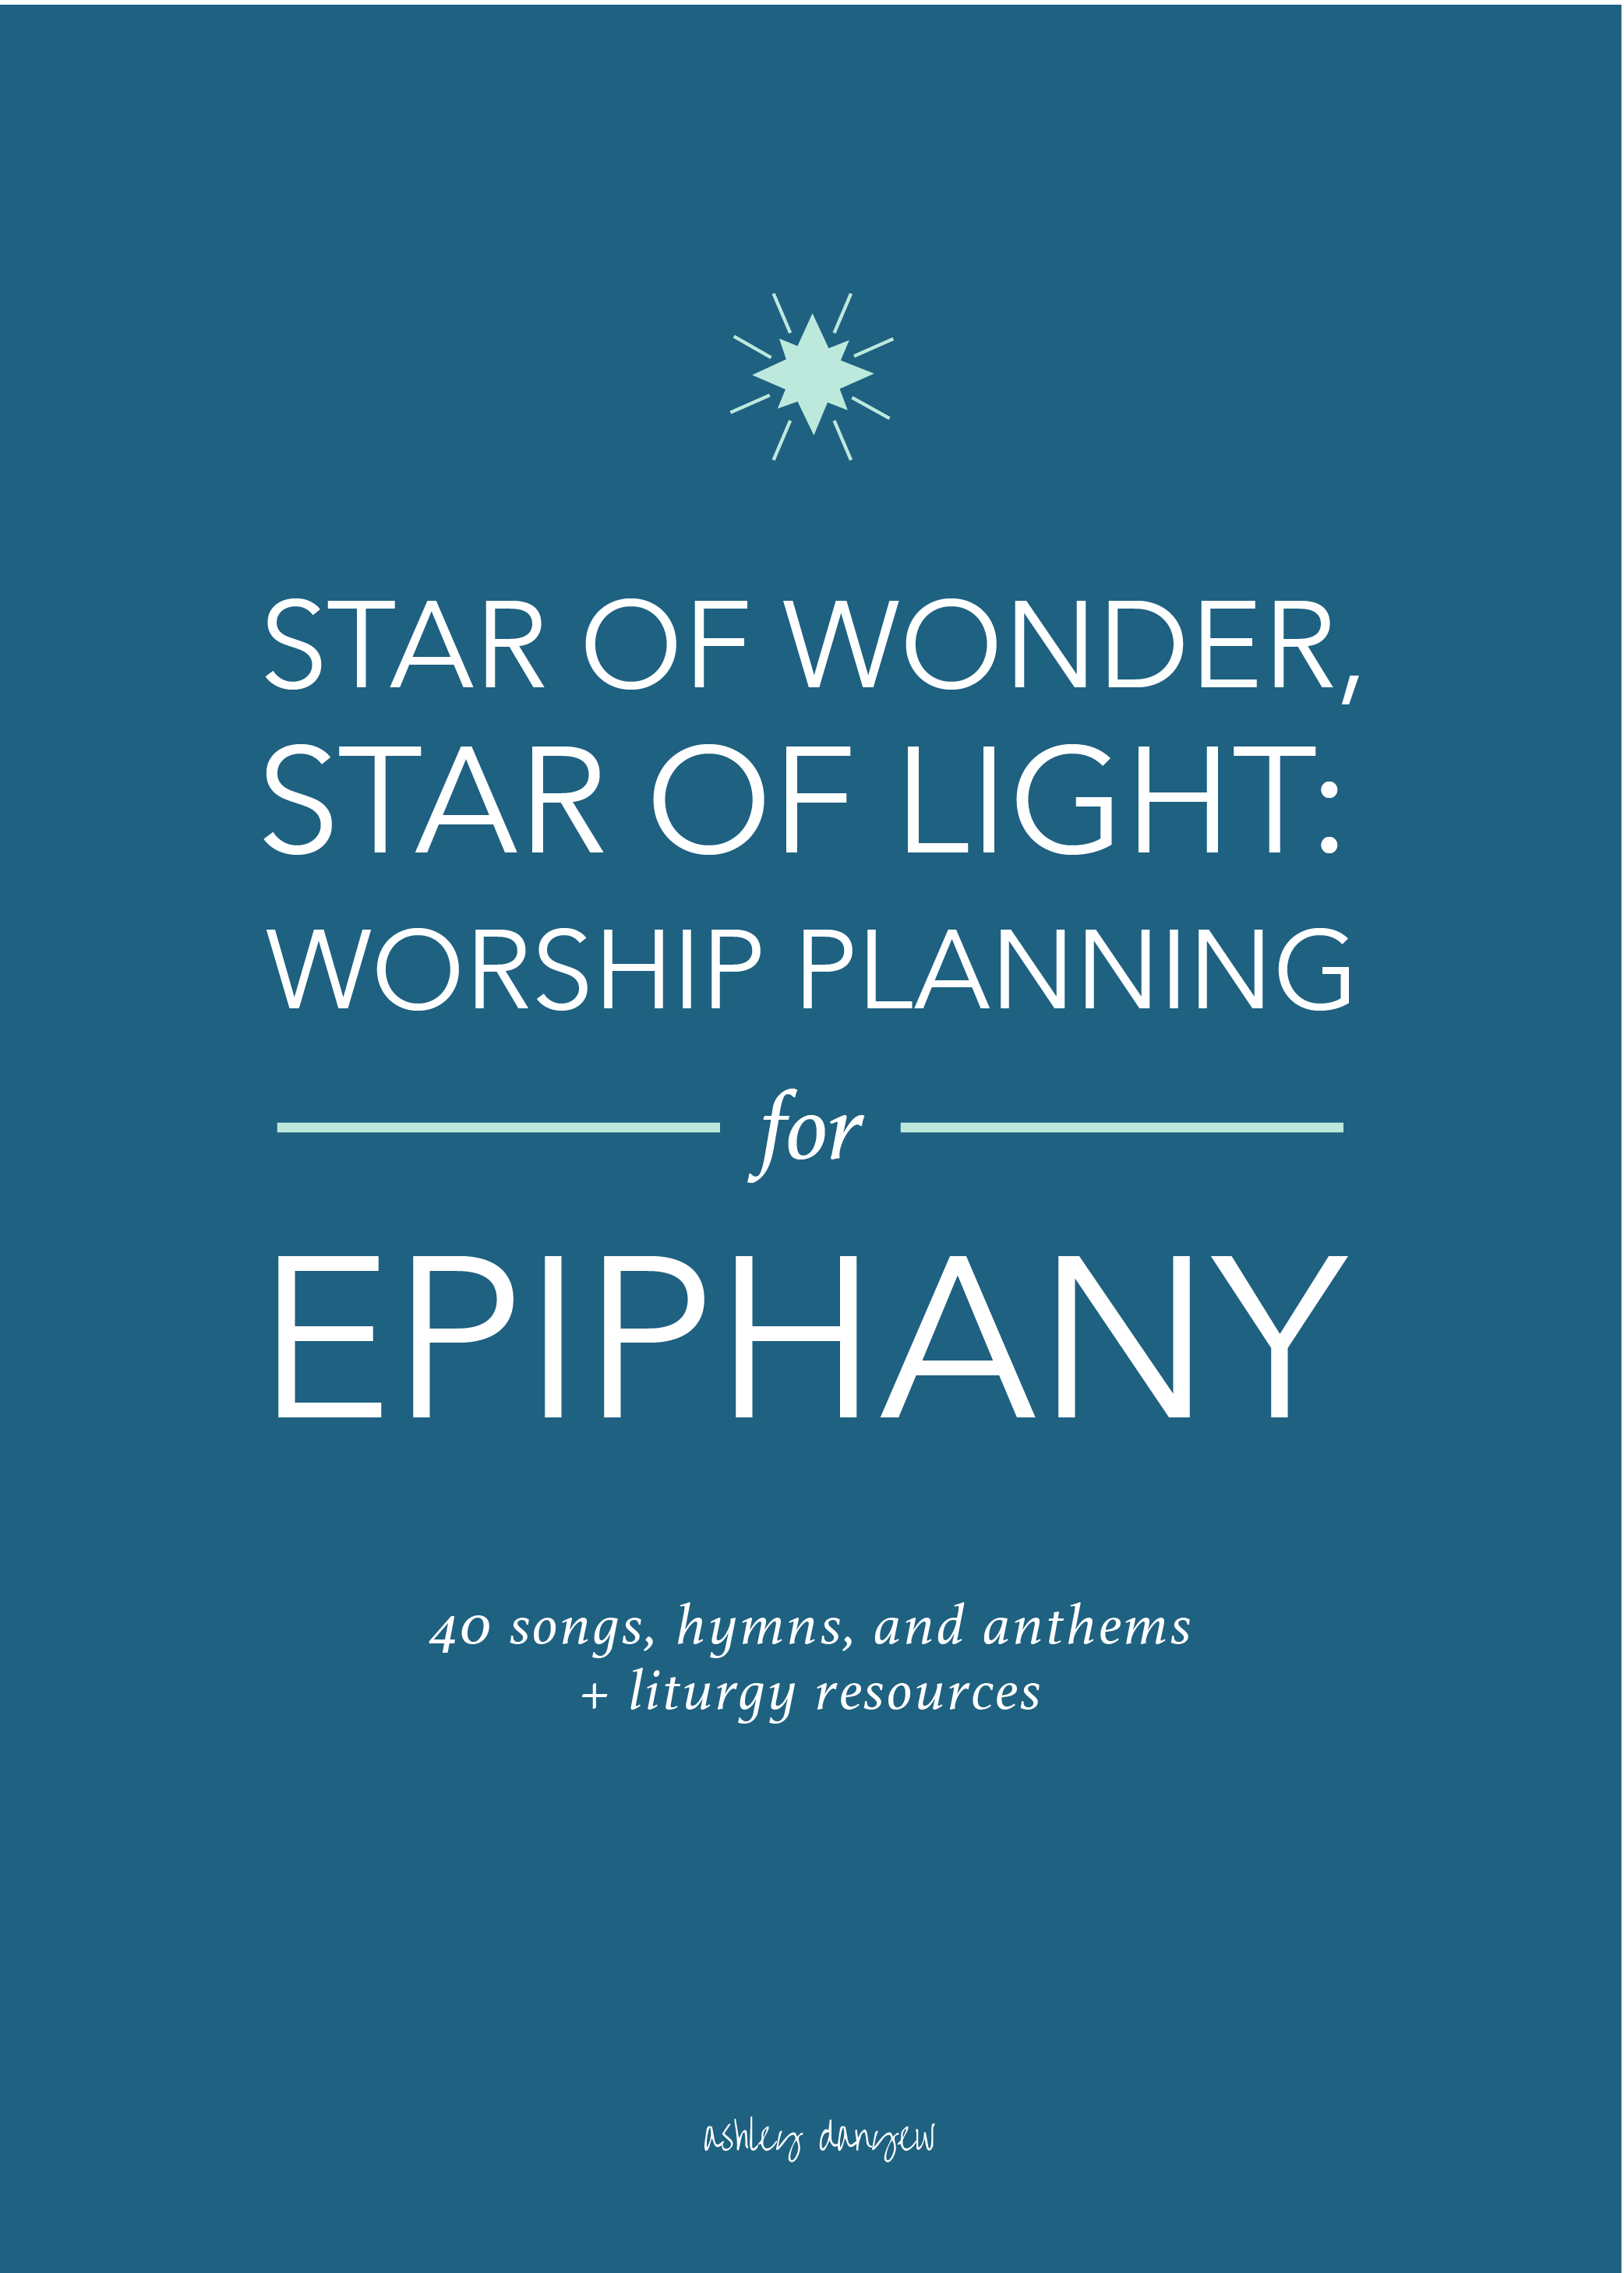 Copy of Star of Wonder, Star of Light: Worship Planning for Epiphany